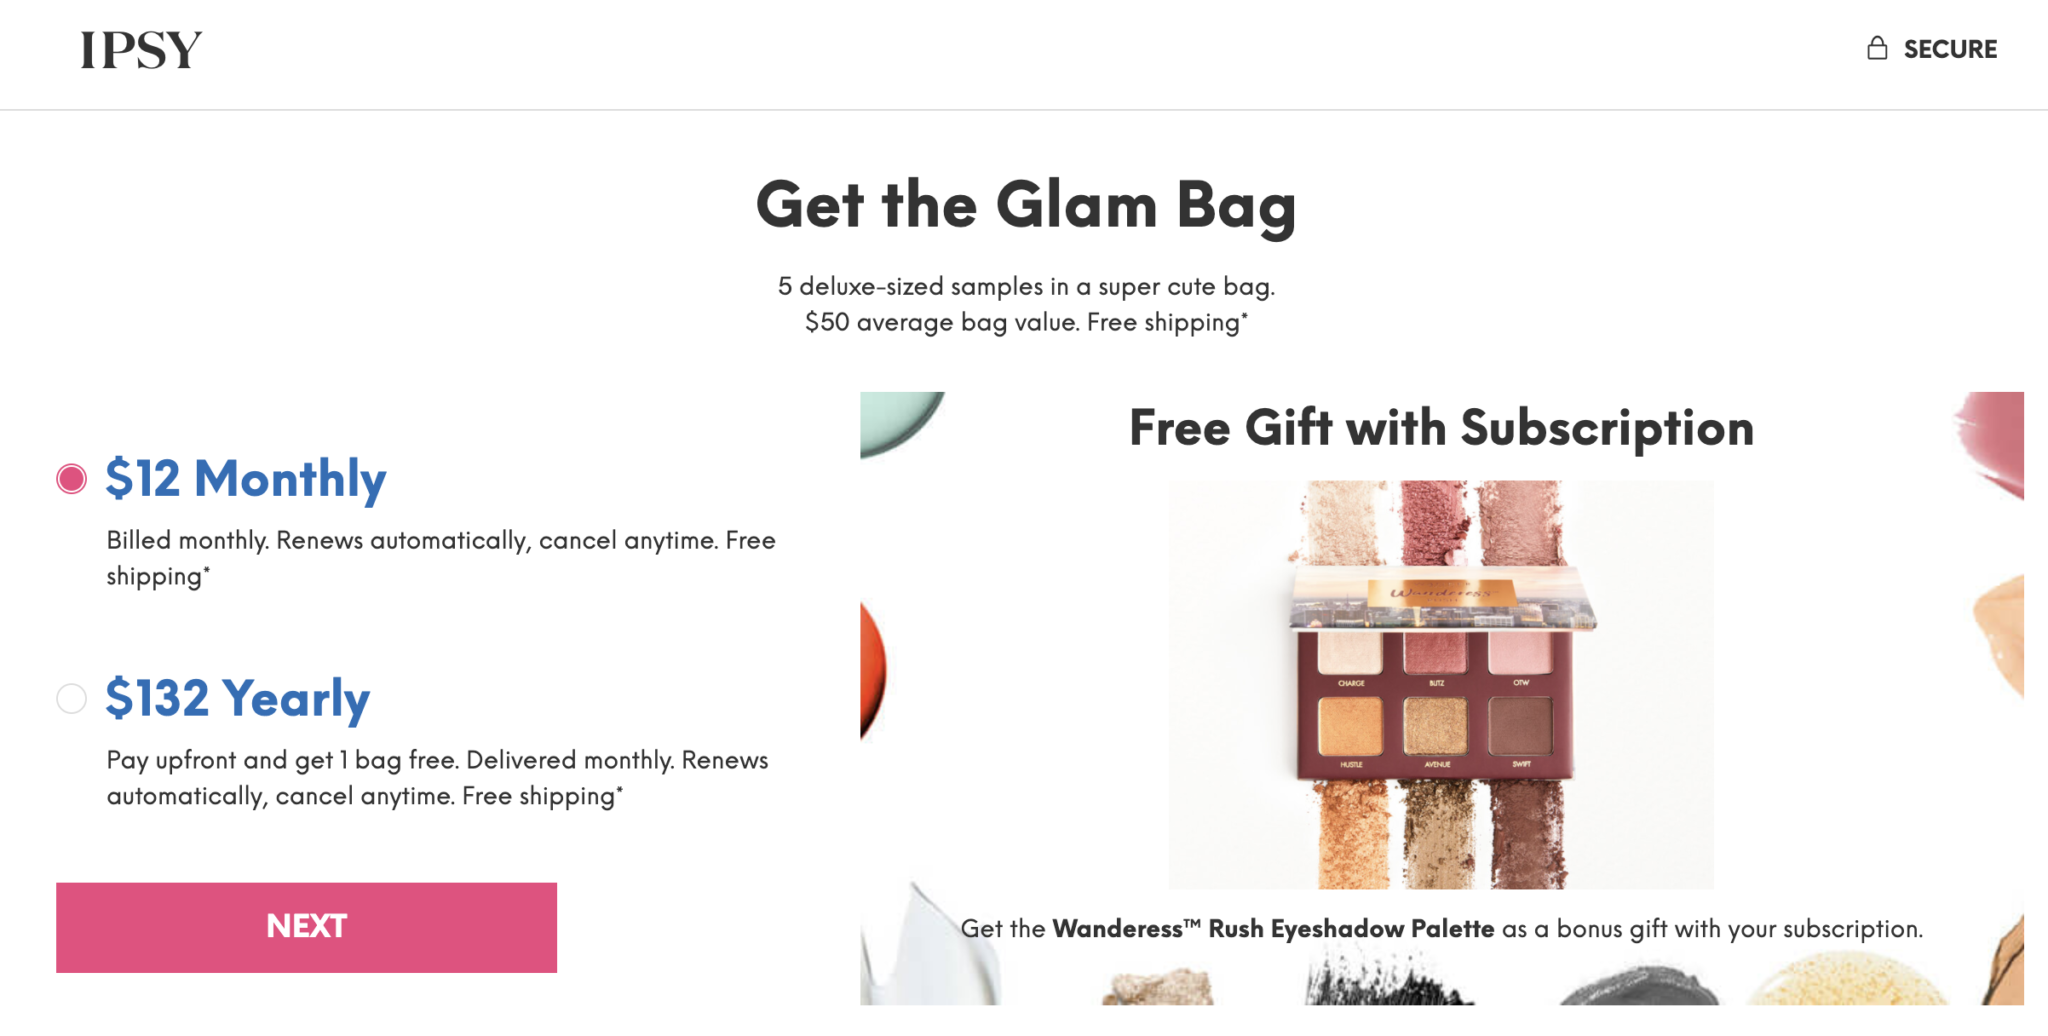 Ipsy Coupon Free Wanderess Rush Eyeshadow Palette with Subscription